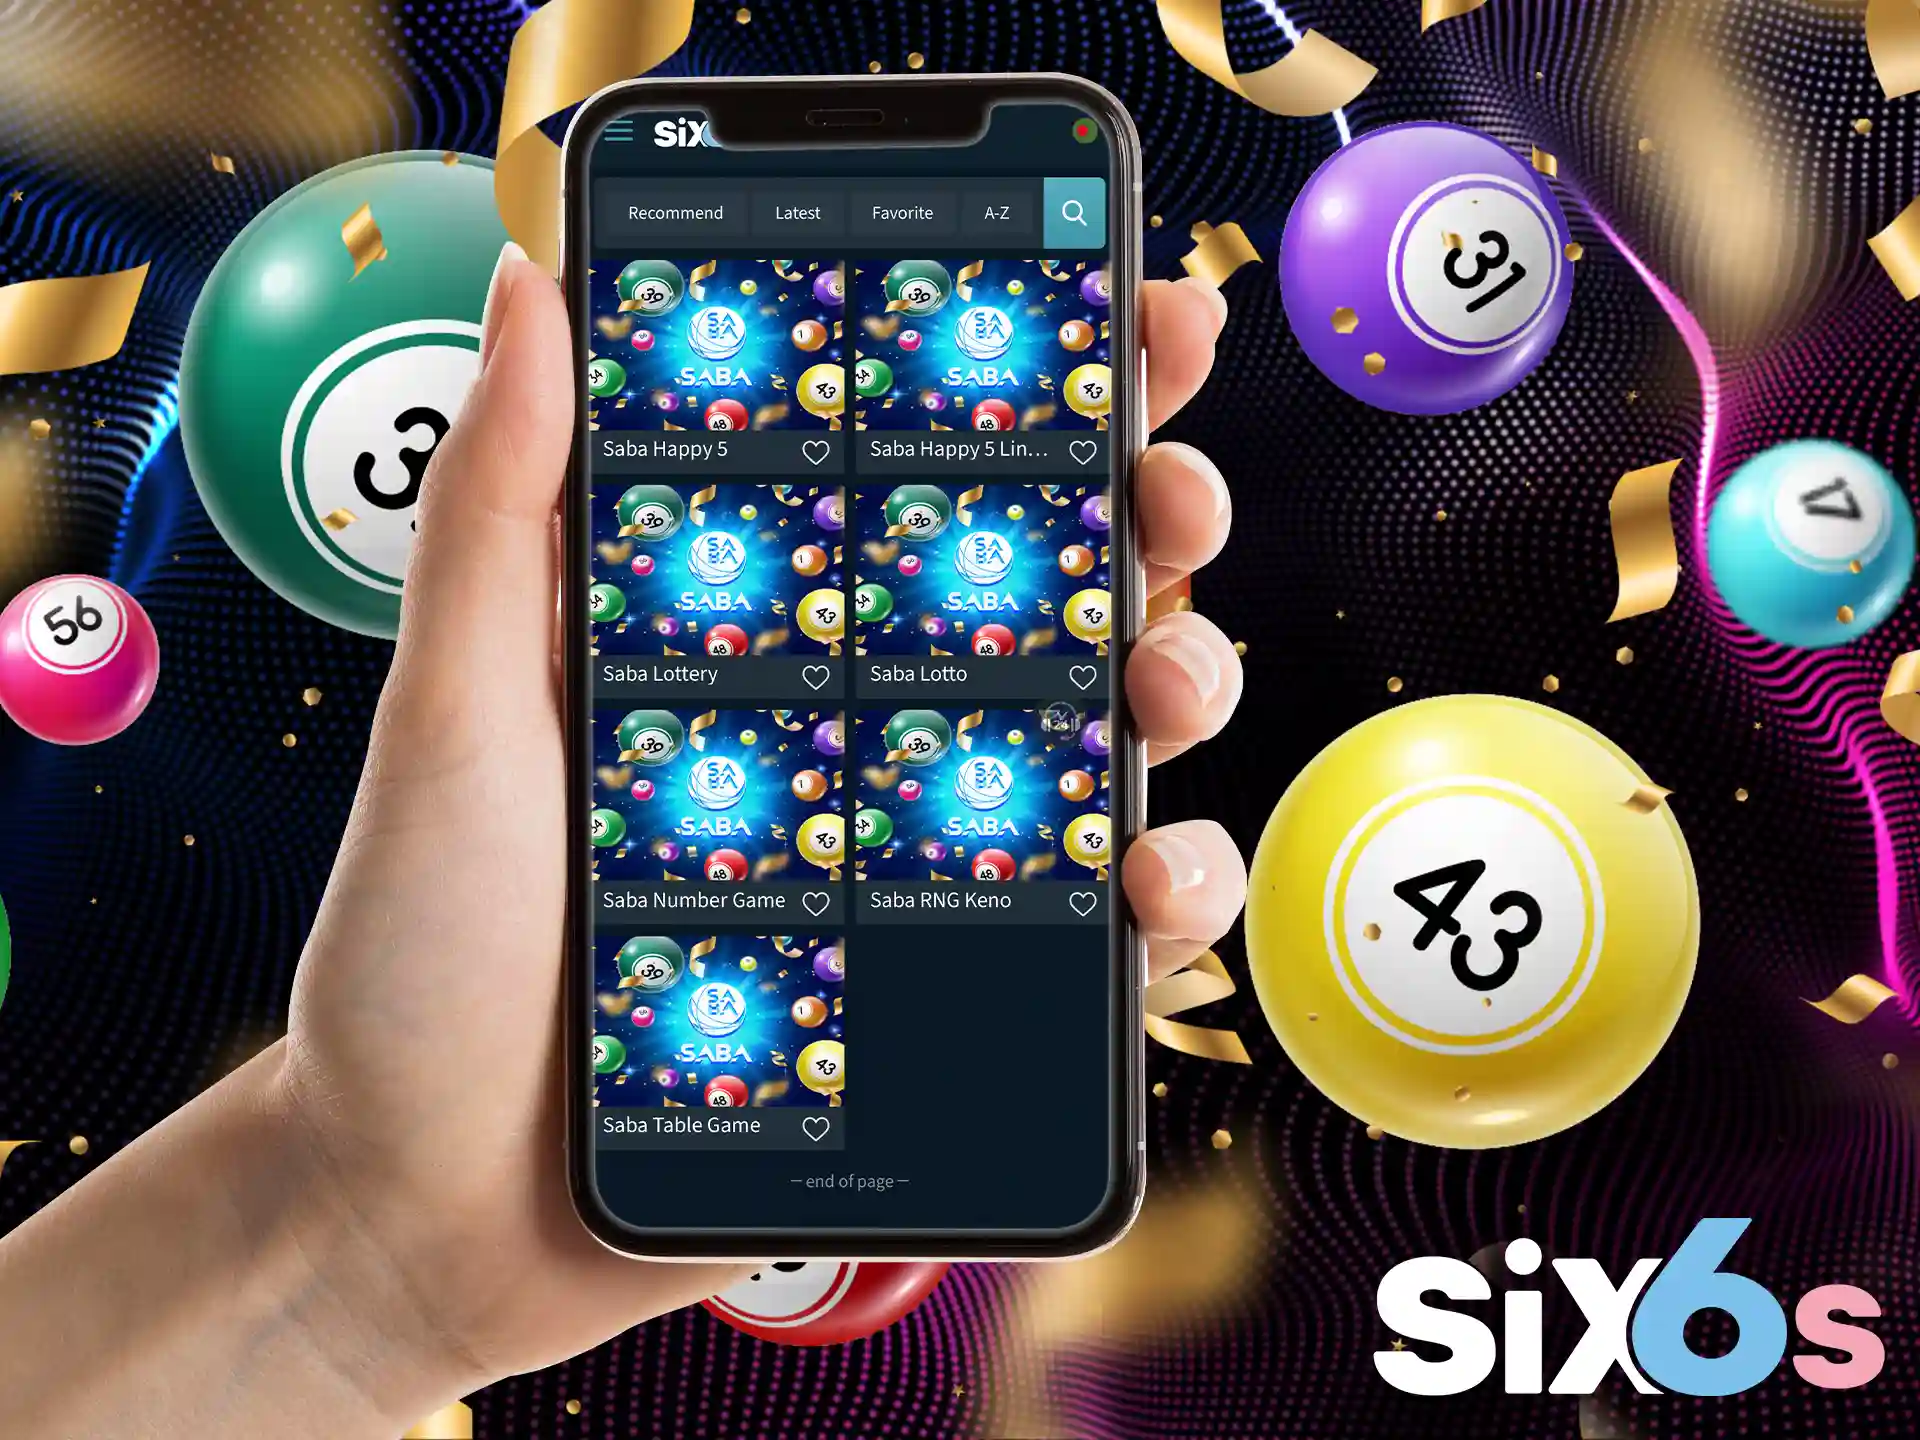 Try playing the Six6s lottery and claim your winnings.